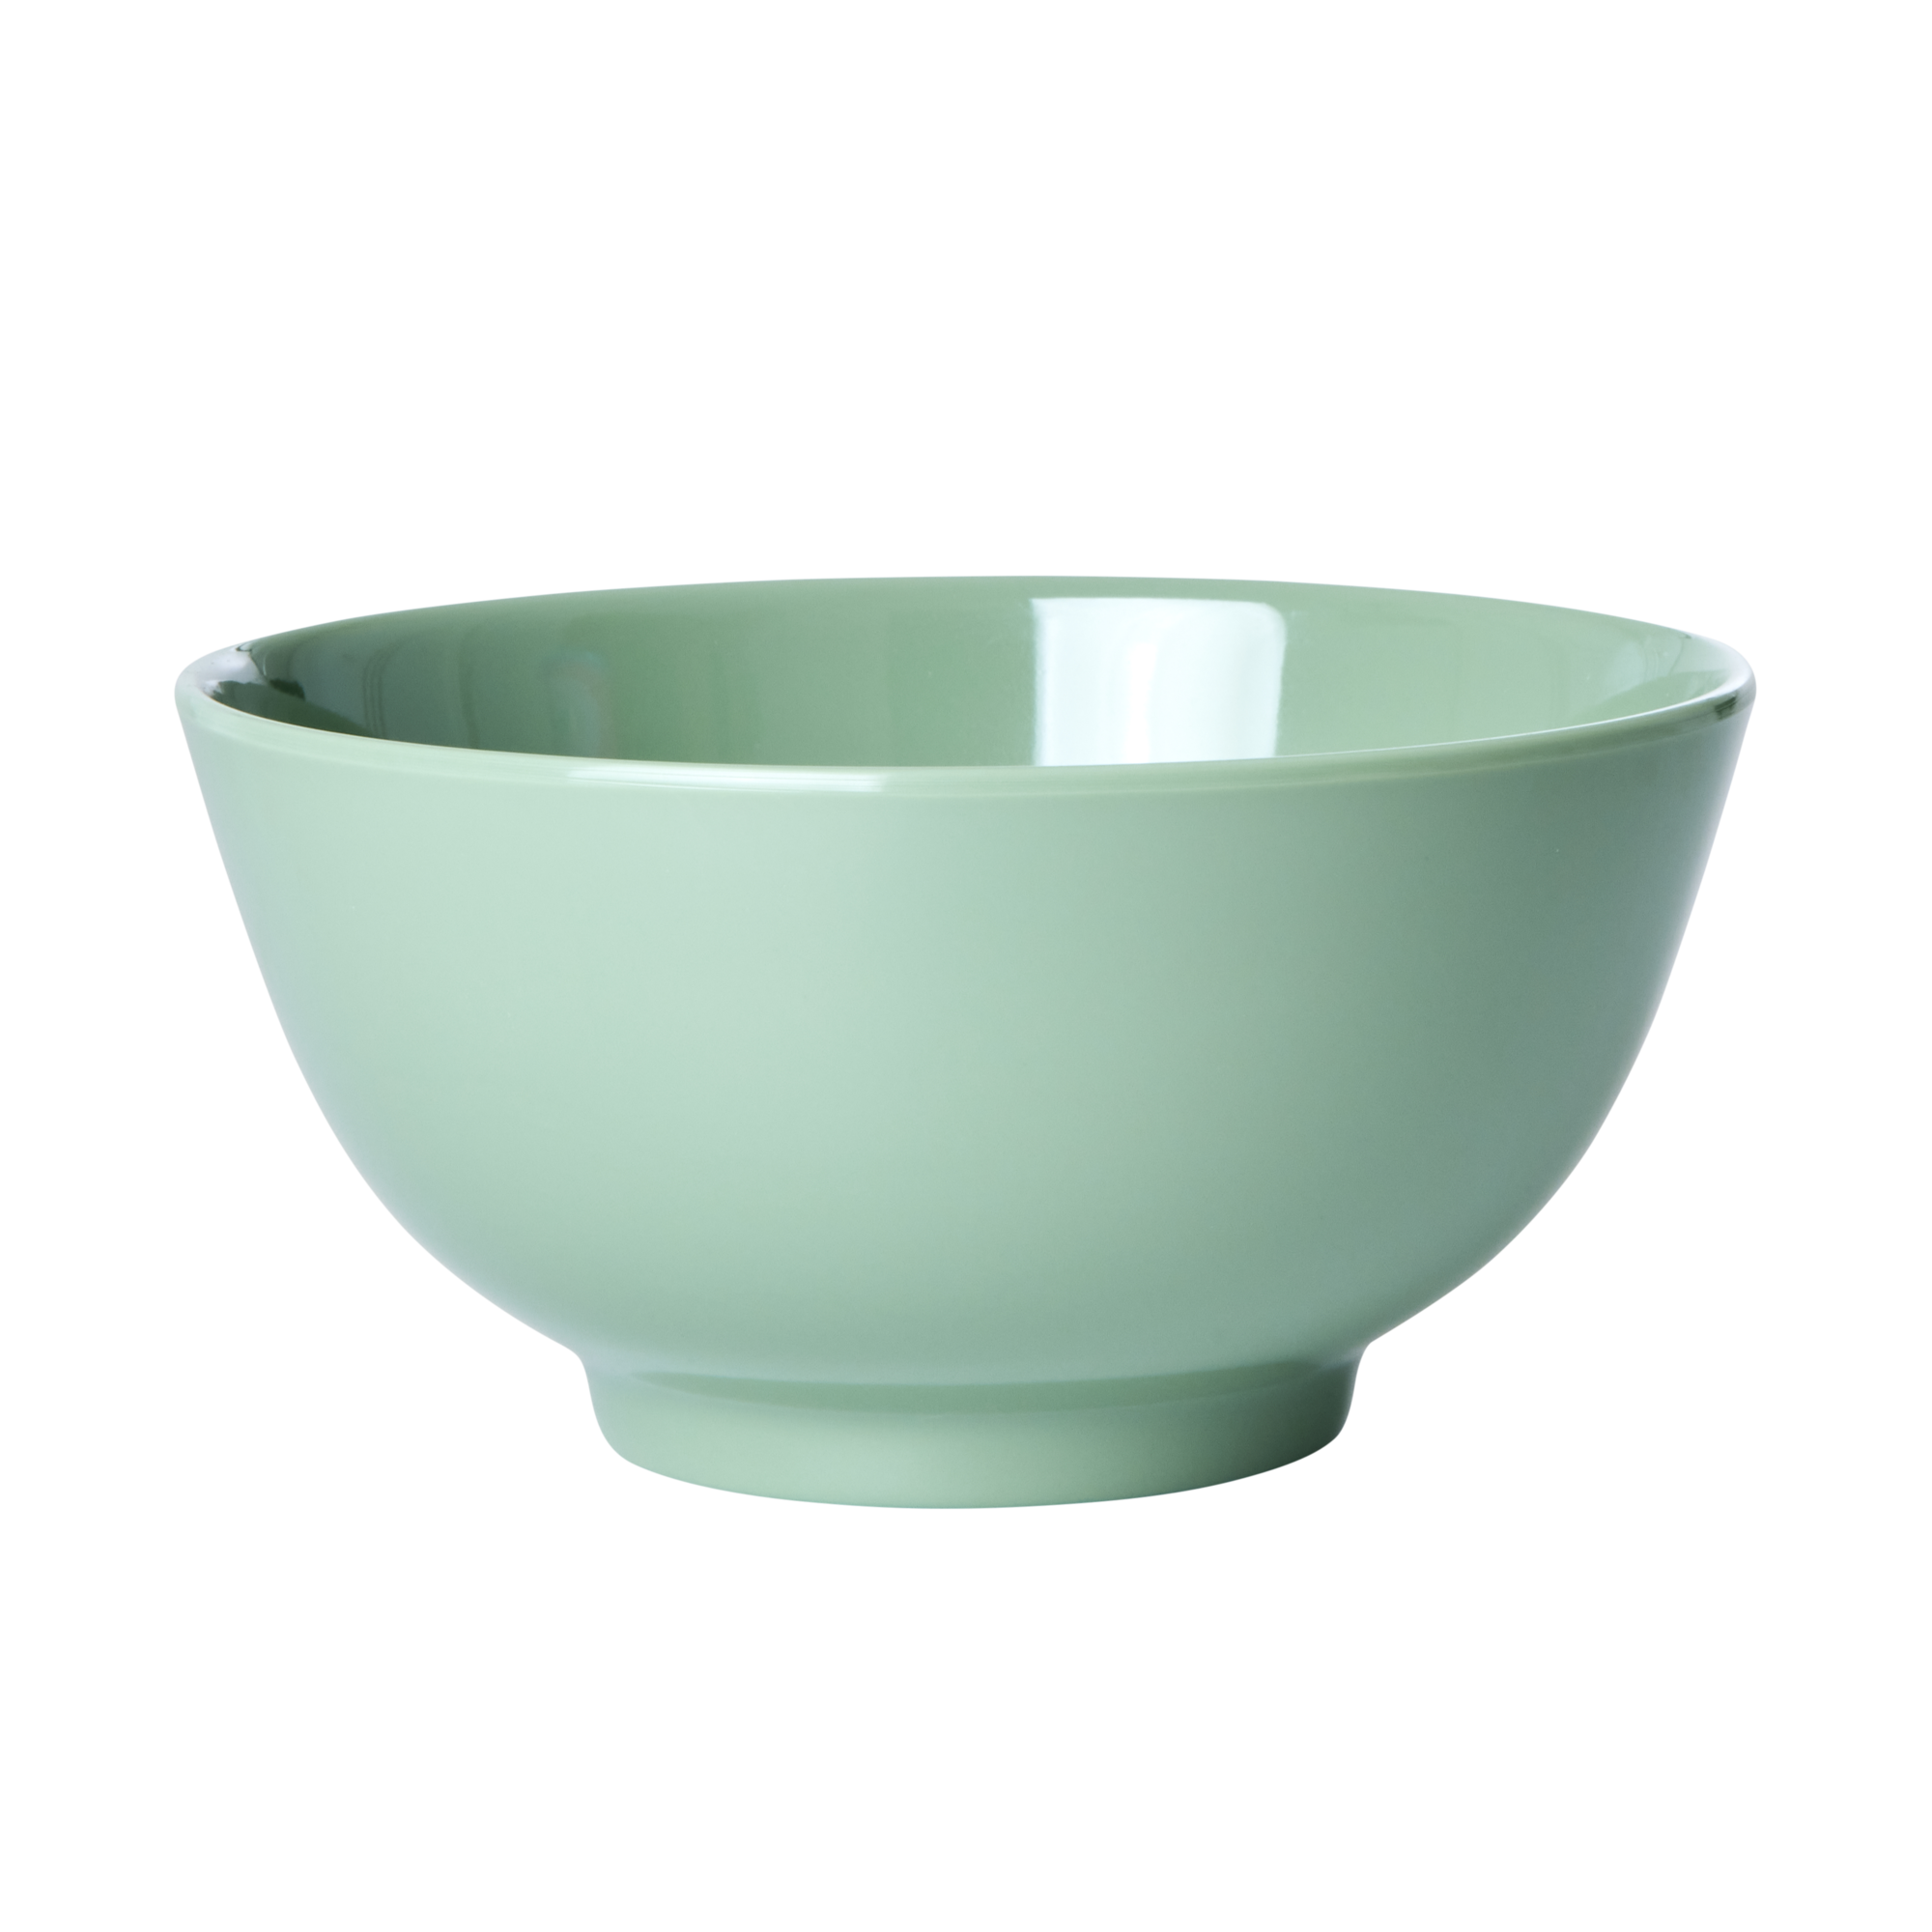 Melamine bowl by Rice by Rice in the color mint